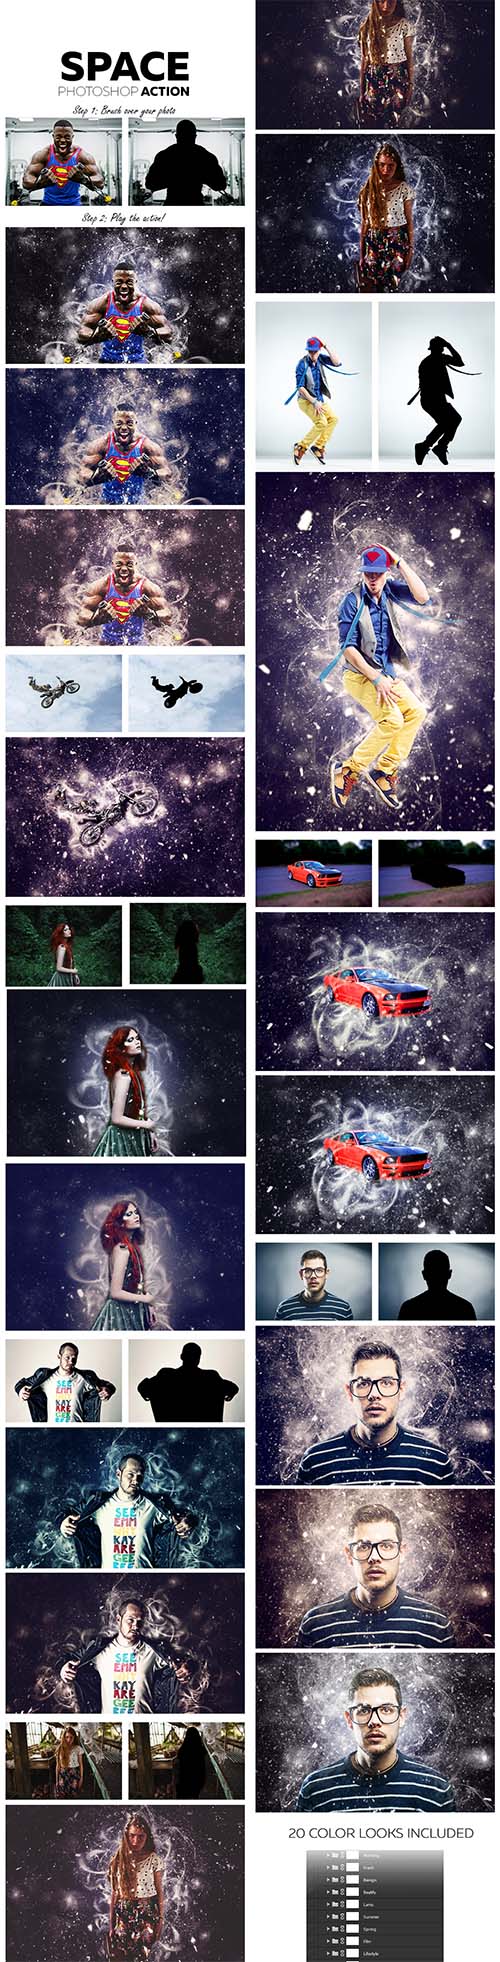 GraphicRiver - Space Photoshop Action 12165749